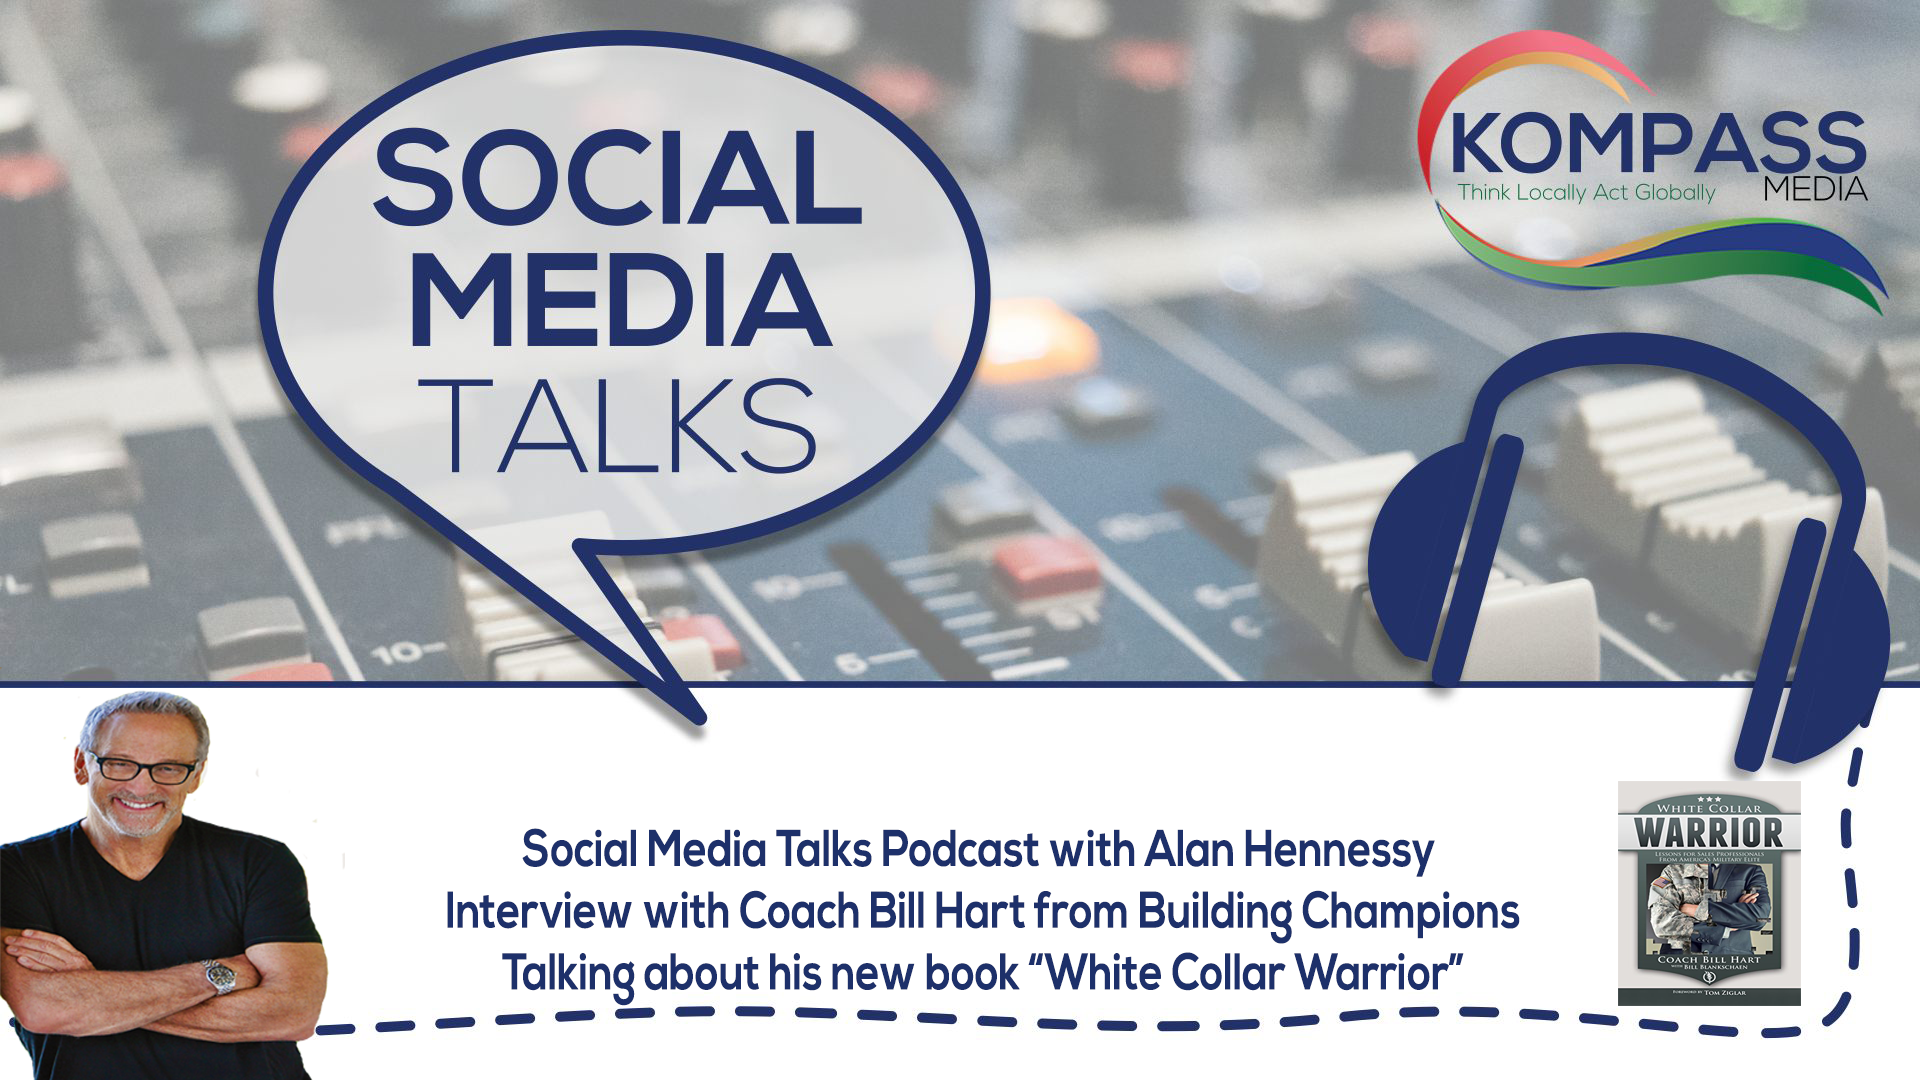 Social Media Talks Podcast with Coach Bill Hart talking about his new book White Collar Warrior - Lessons for Sales Professionals from America's Military Elite